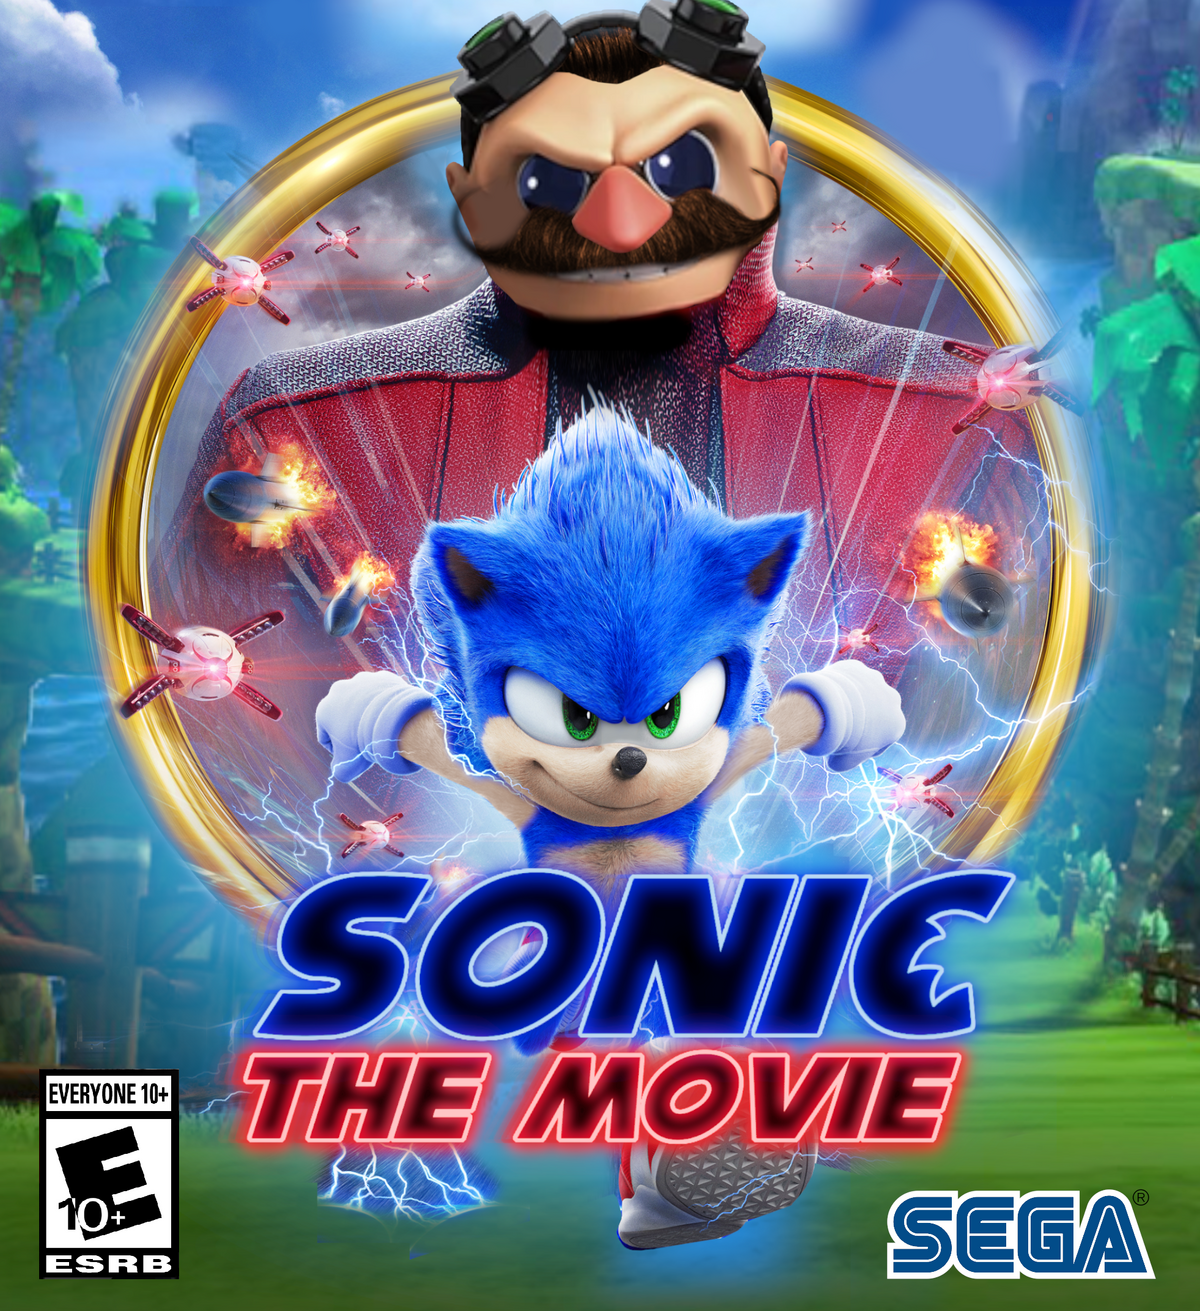 Sonic the Movie (video game) (Johnsonverse), DifferentHistory Wikia